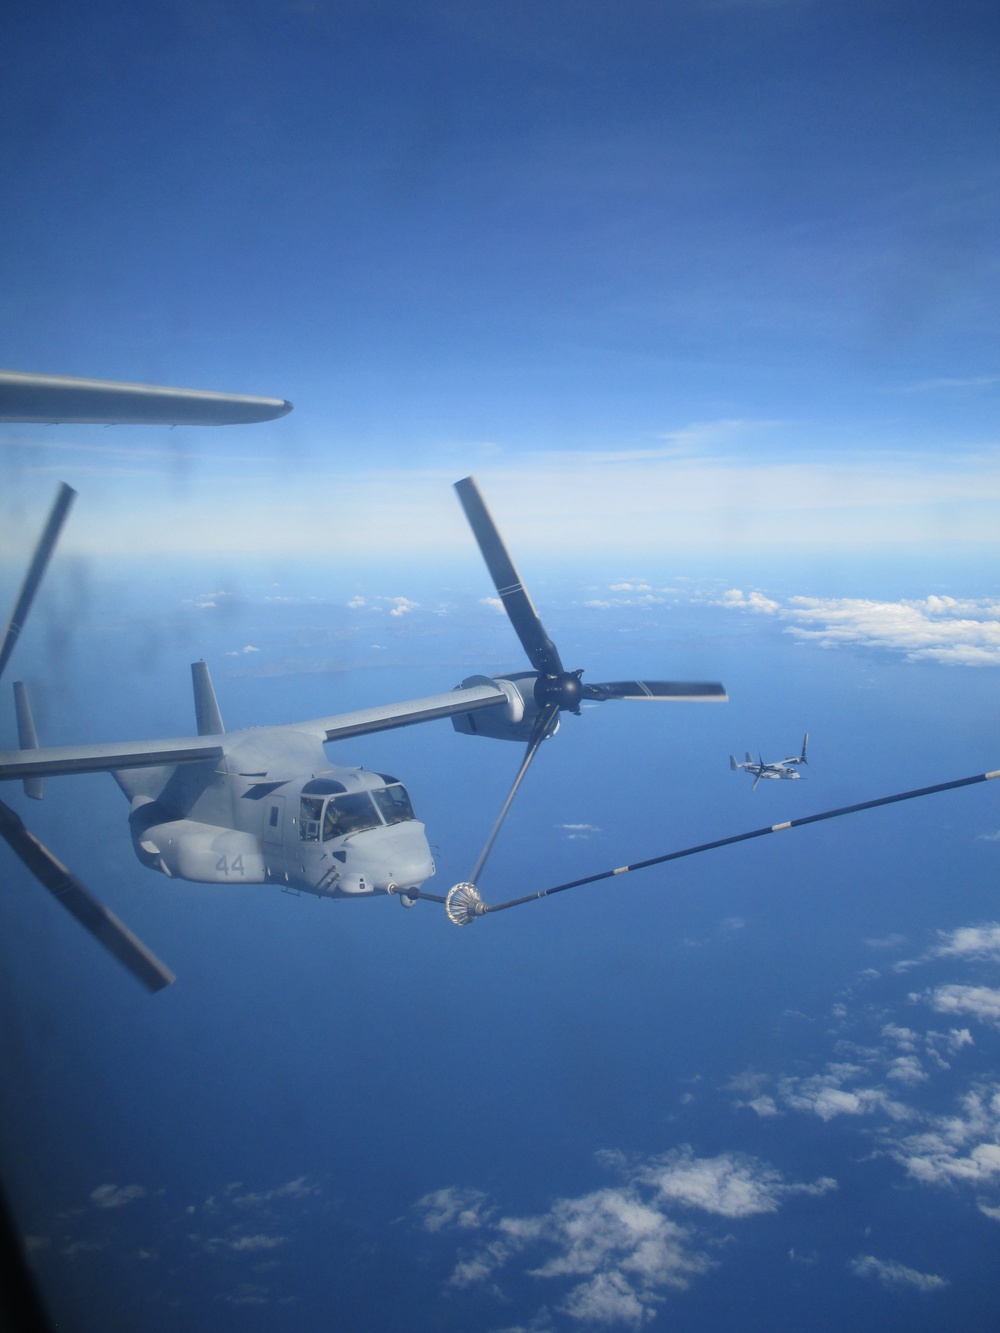 Ospreys refuel in mid-air en route to Singapore